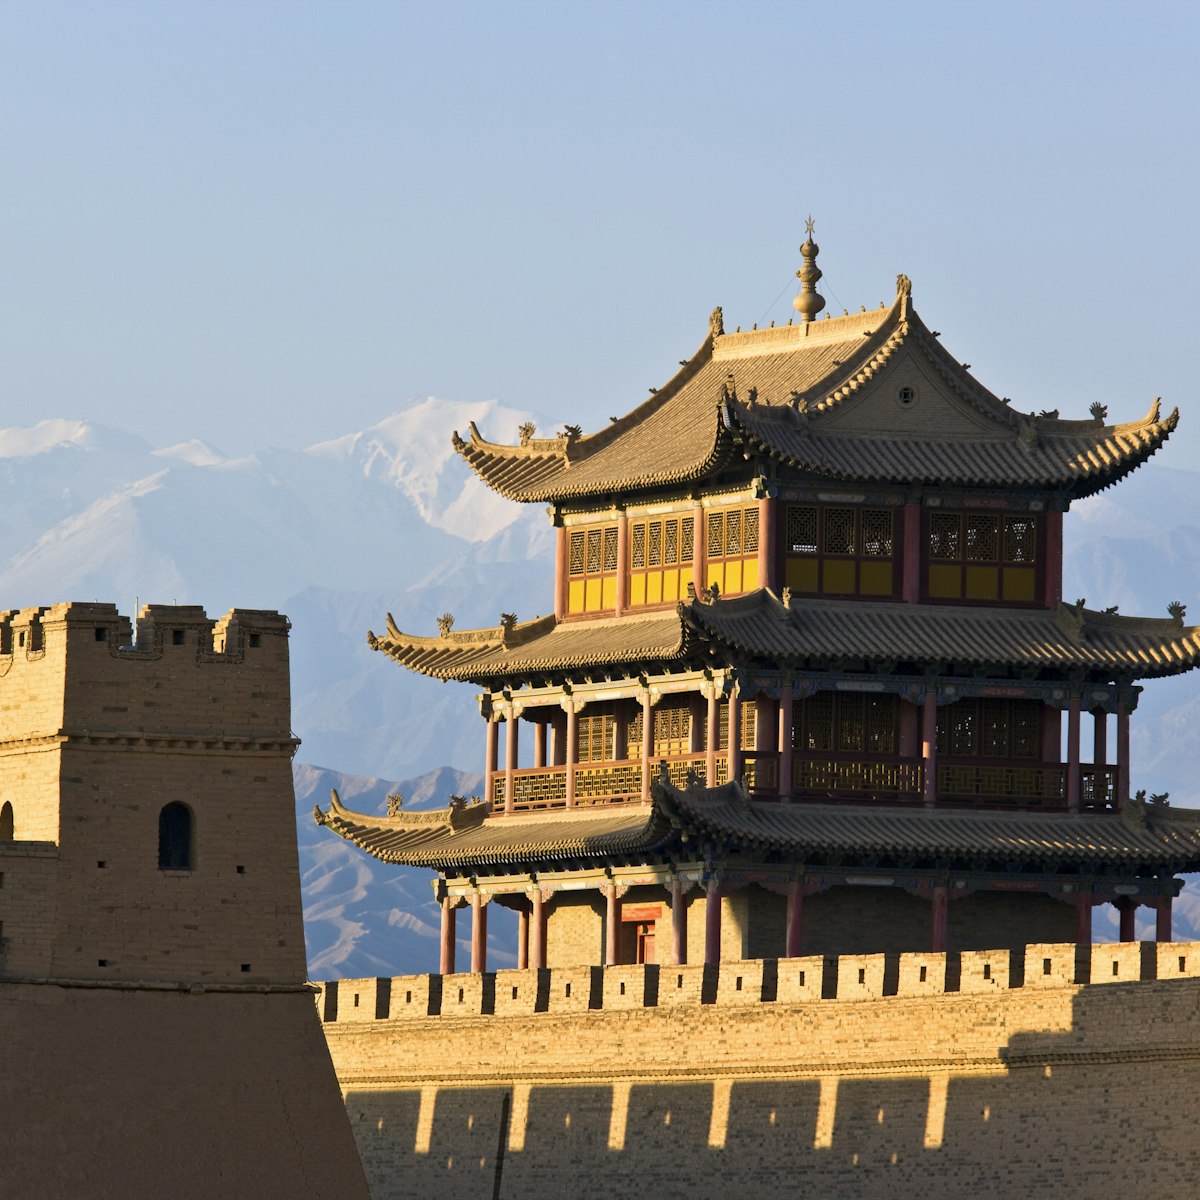 Jiayuguan Fortress on the West end of the Great Wall at Jia Yu Guan Pass